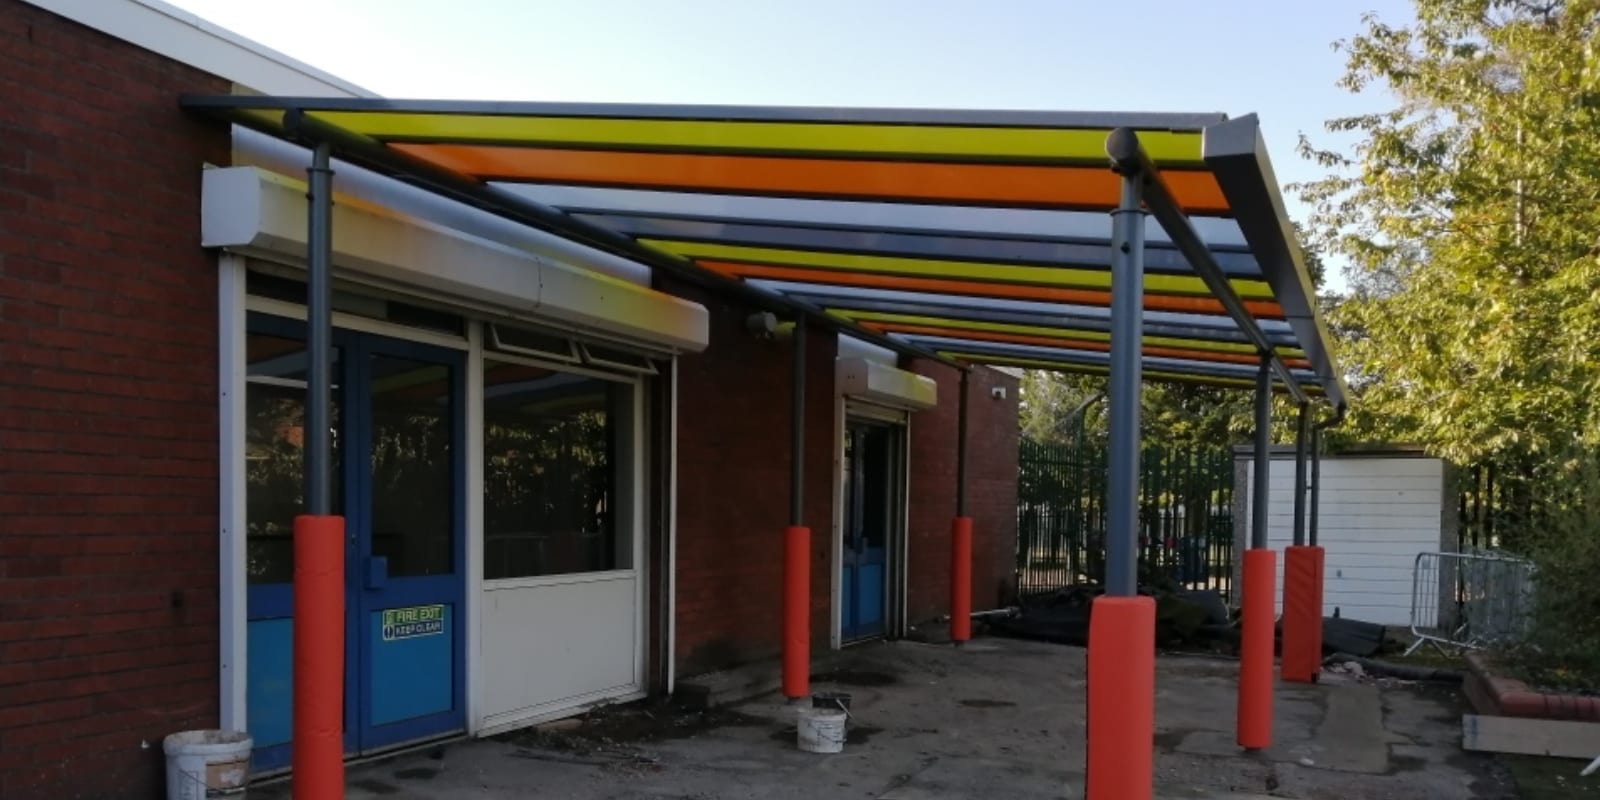 Colourful shelter we designed for Wyndcliffe Primary School